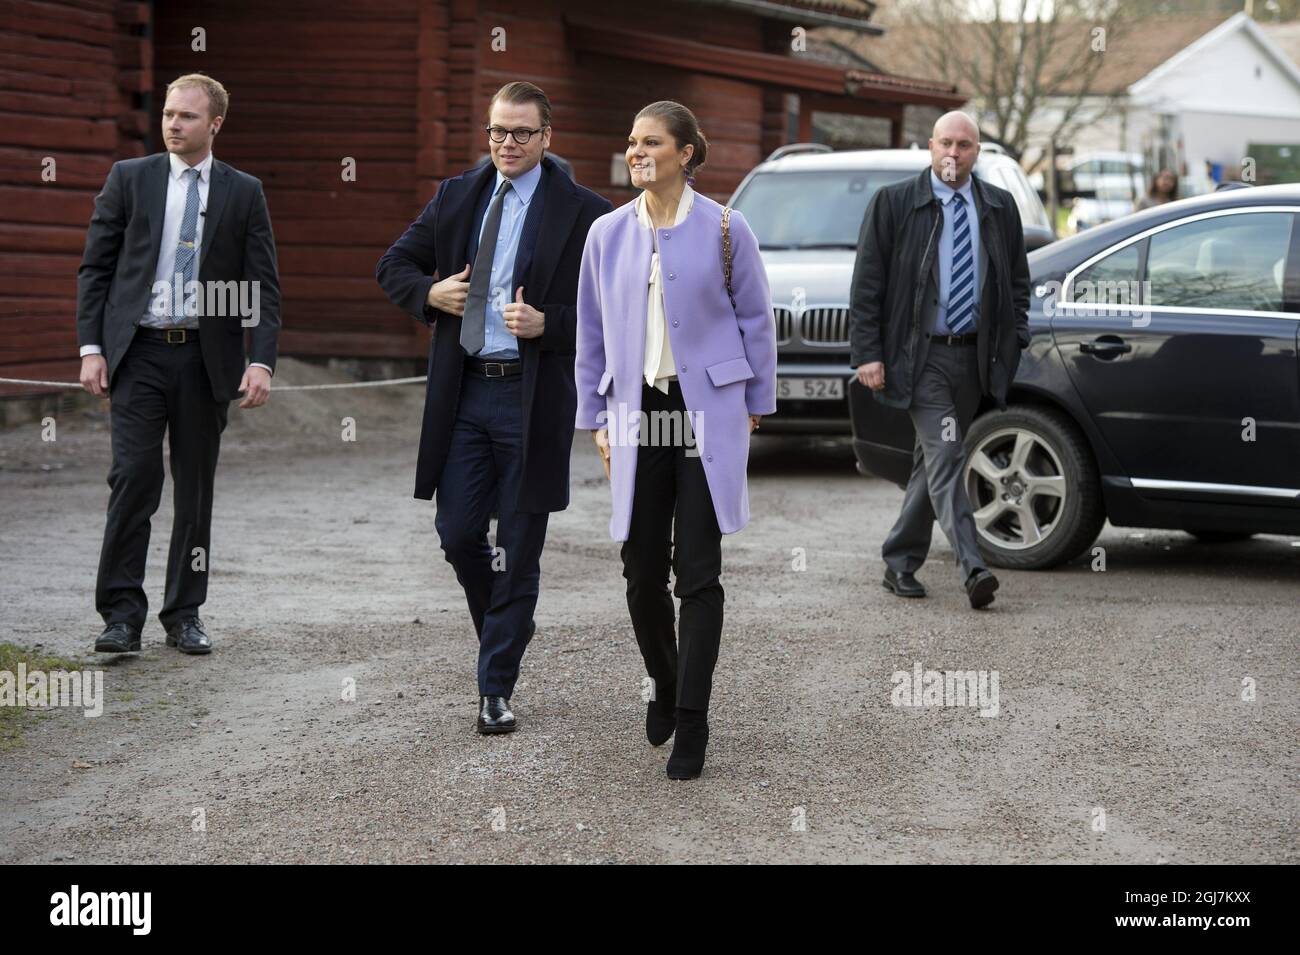 STOCKHOLM 20121121 Crown Princess Victoria and Prince Daniel are seen during the visit to an integration project in the city of Fagersta, Sweden, November 21, 2012. In the picture they visit the area Västanfors hembygdsområde, an old time open air museum. Foto: Stefan Söderström / XP / SCANPIX / kod 7120 ** OUT SWEDEN OUT ** Stock Photo